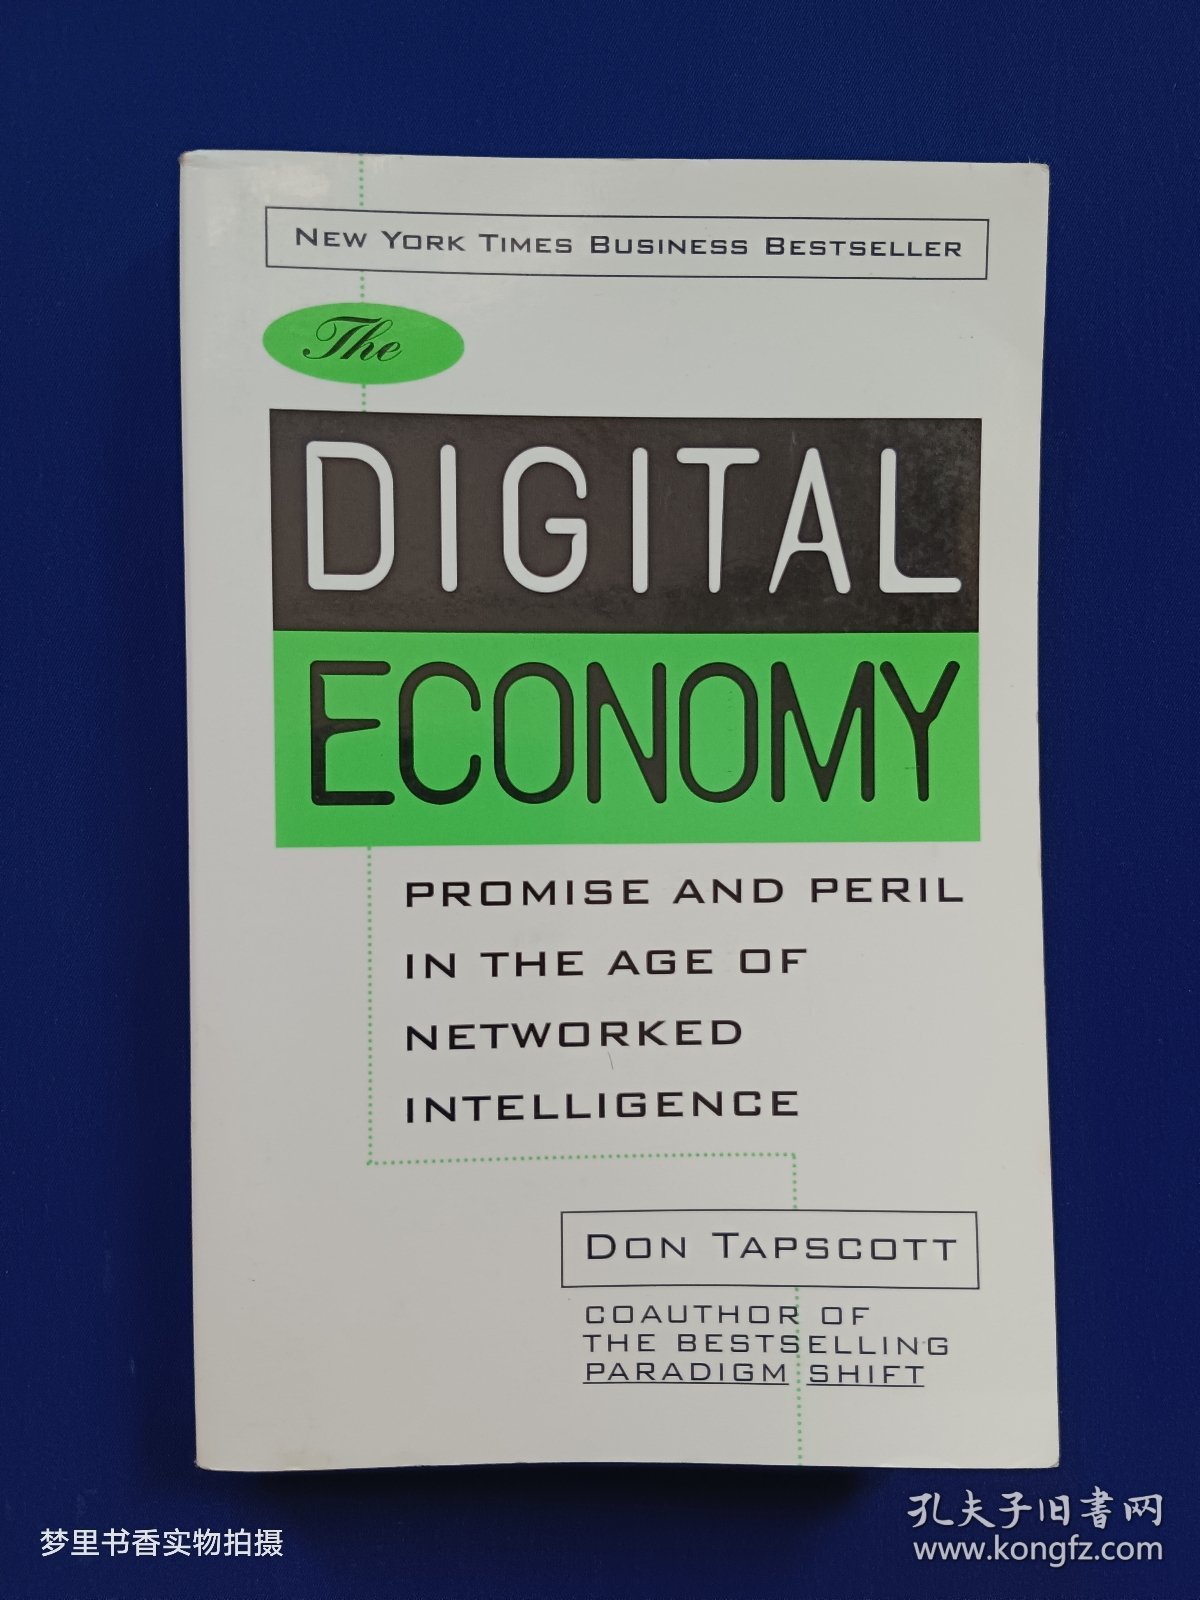 The Digital Economy: Promise and Peril in the Age of Networked Intelligence 数字经济